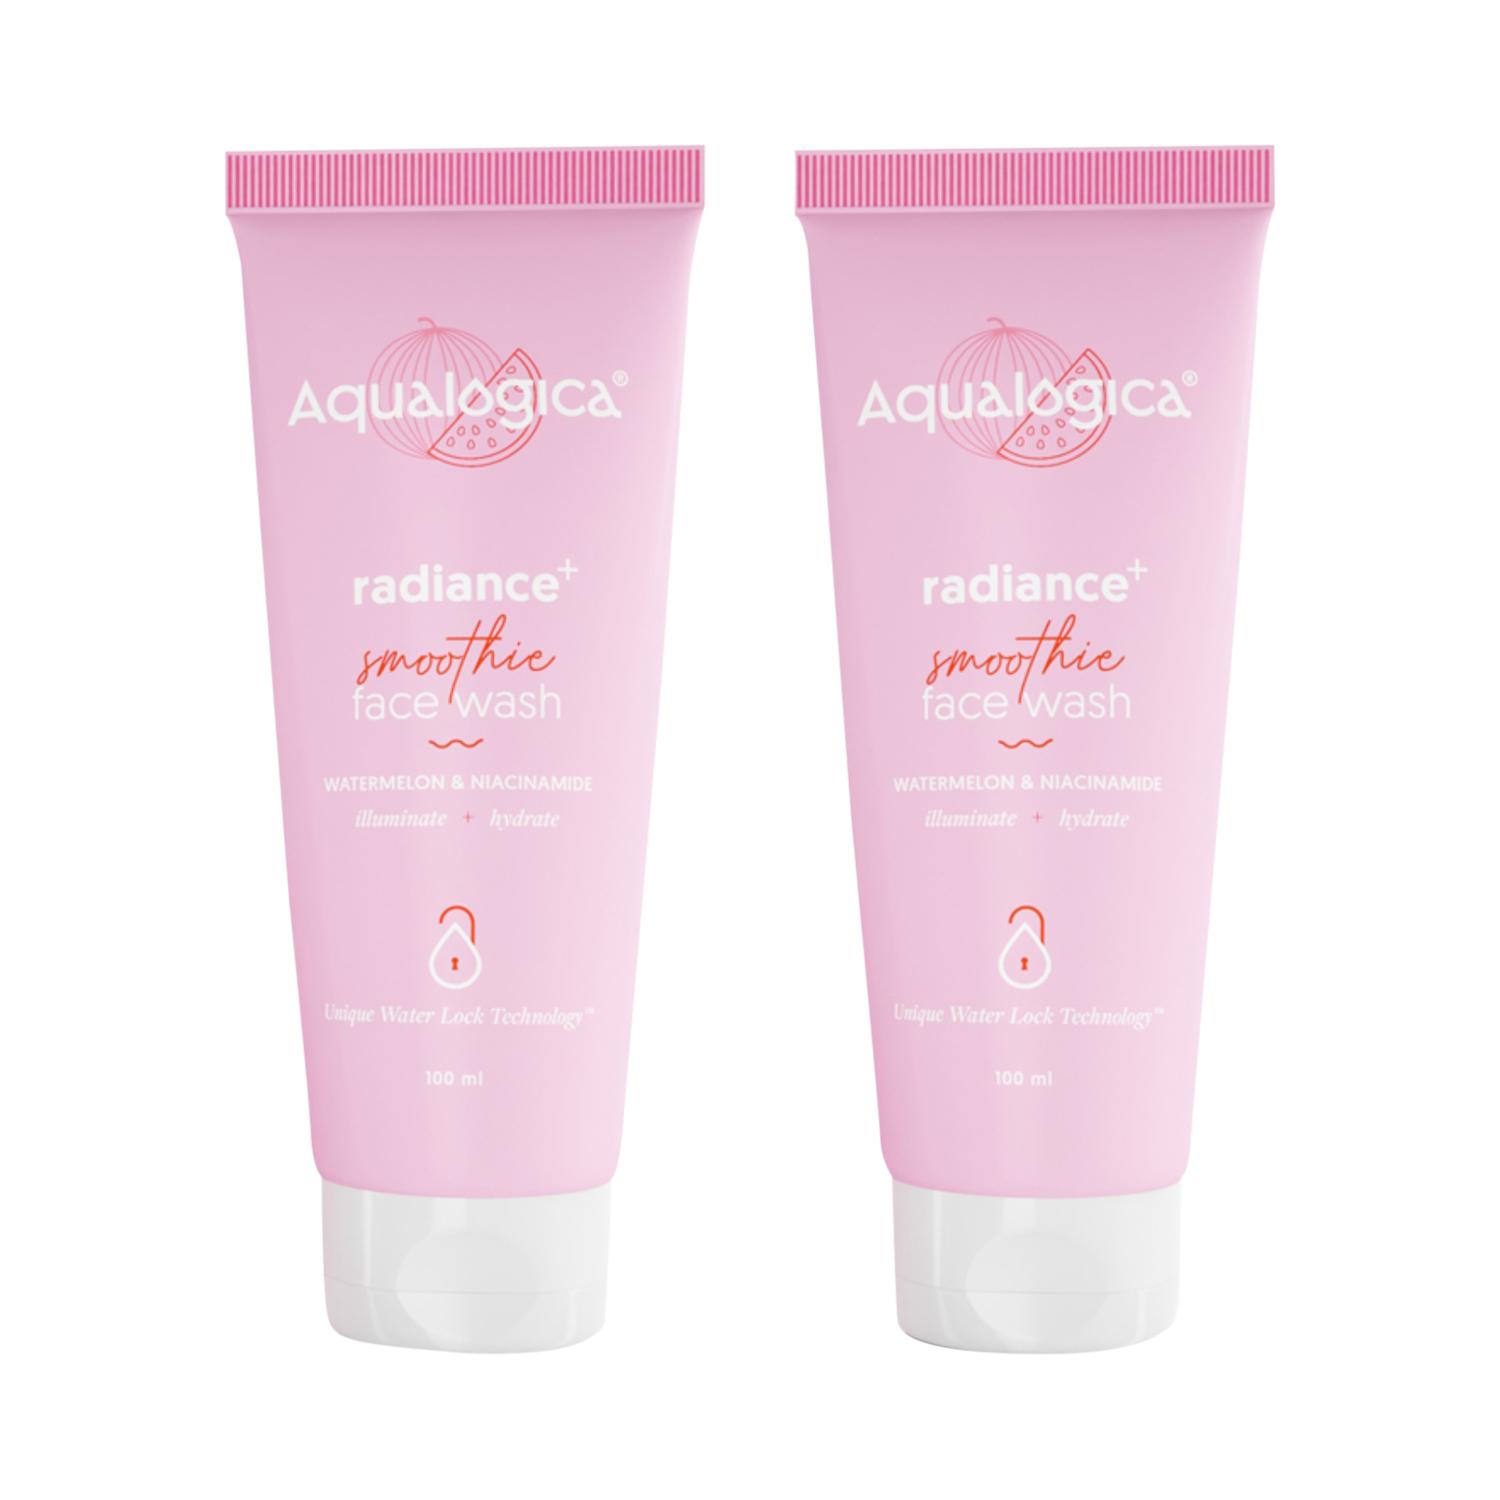 Aqualogica | Aqualogica Radiance+ Smoothie Face Wash -(100ml)(Pack of 2) Combo